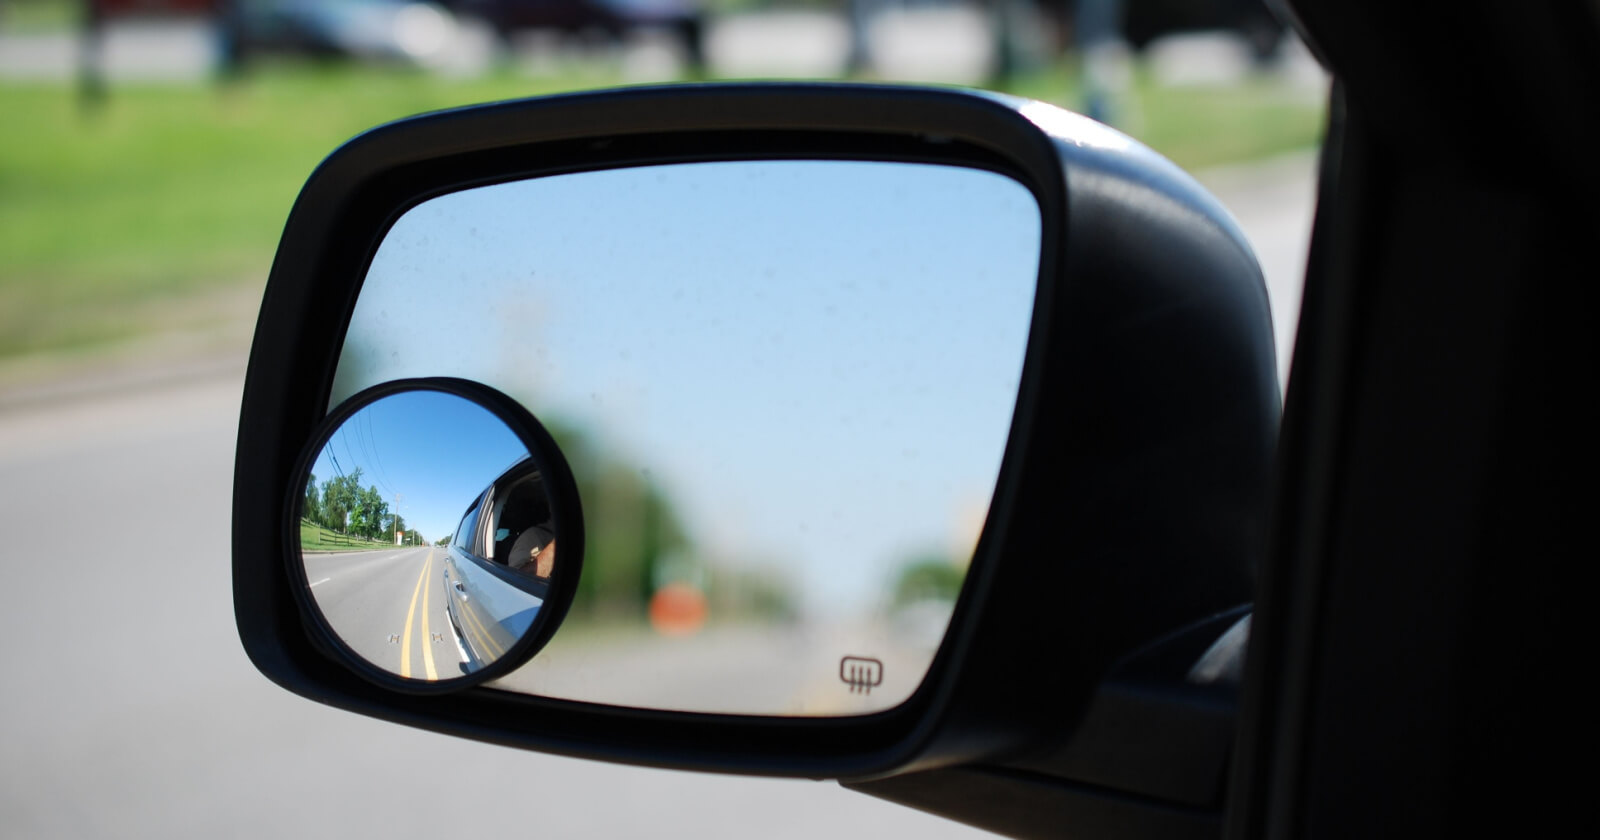 The Pros and Cons of Using Convex Mirrors in Your Car